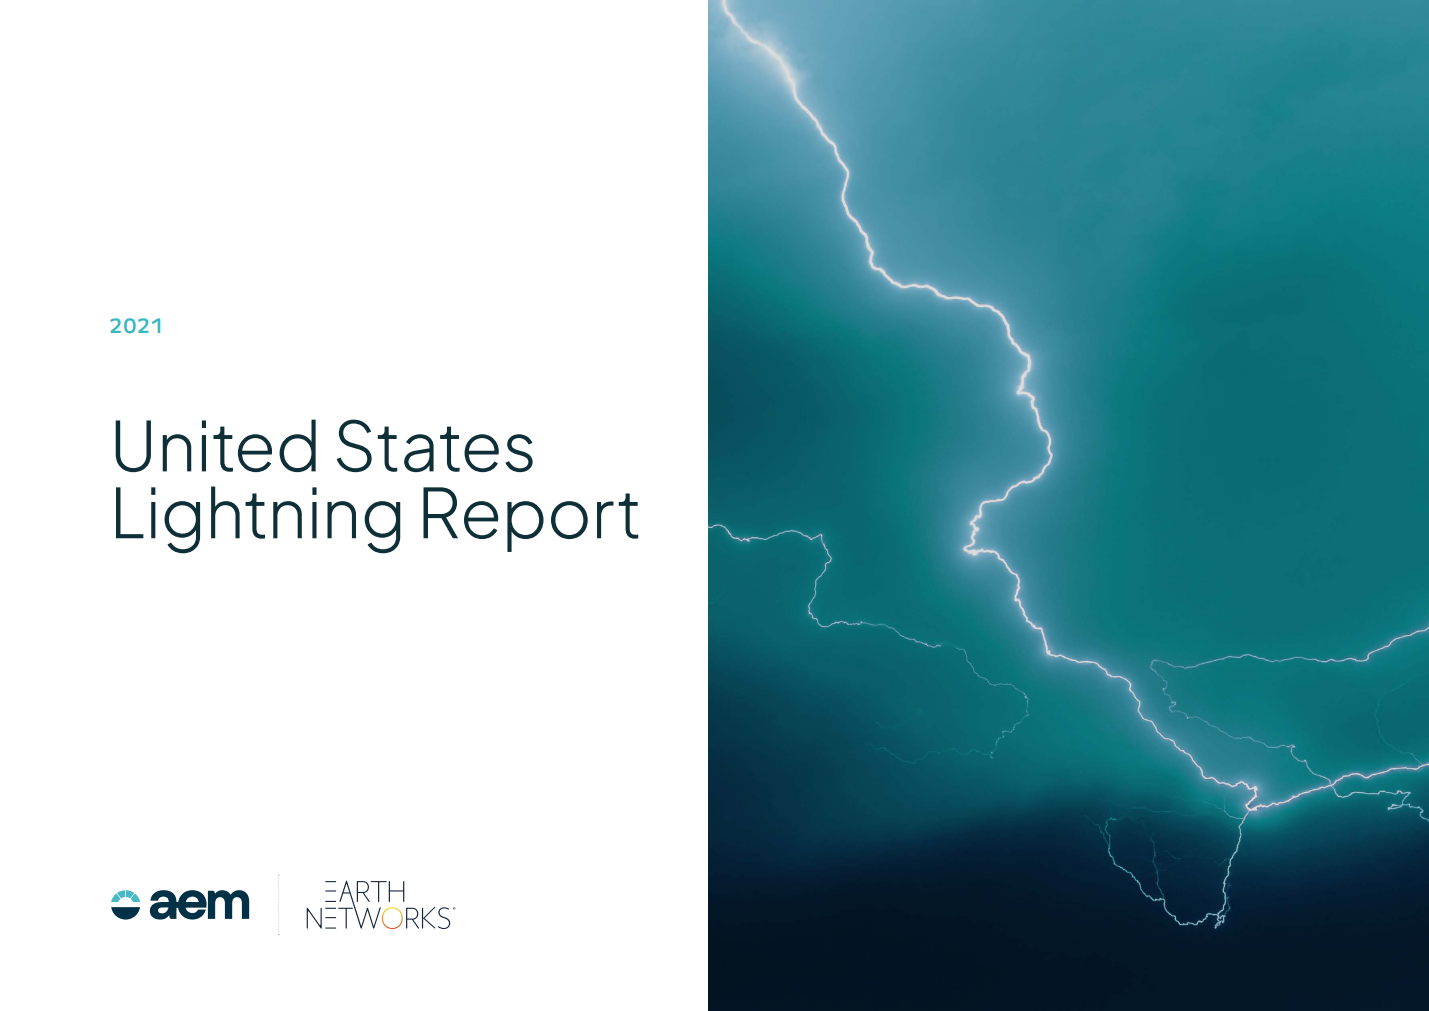 Earth Networks Releases 2021 U.S. Lightning Report